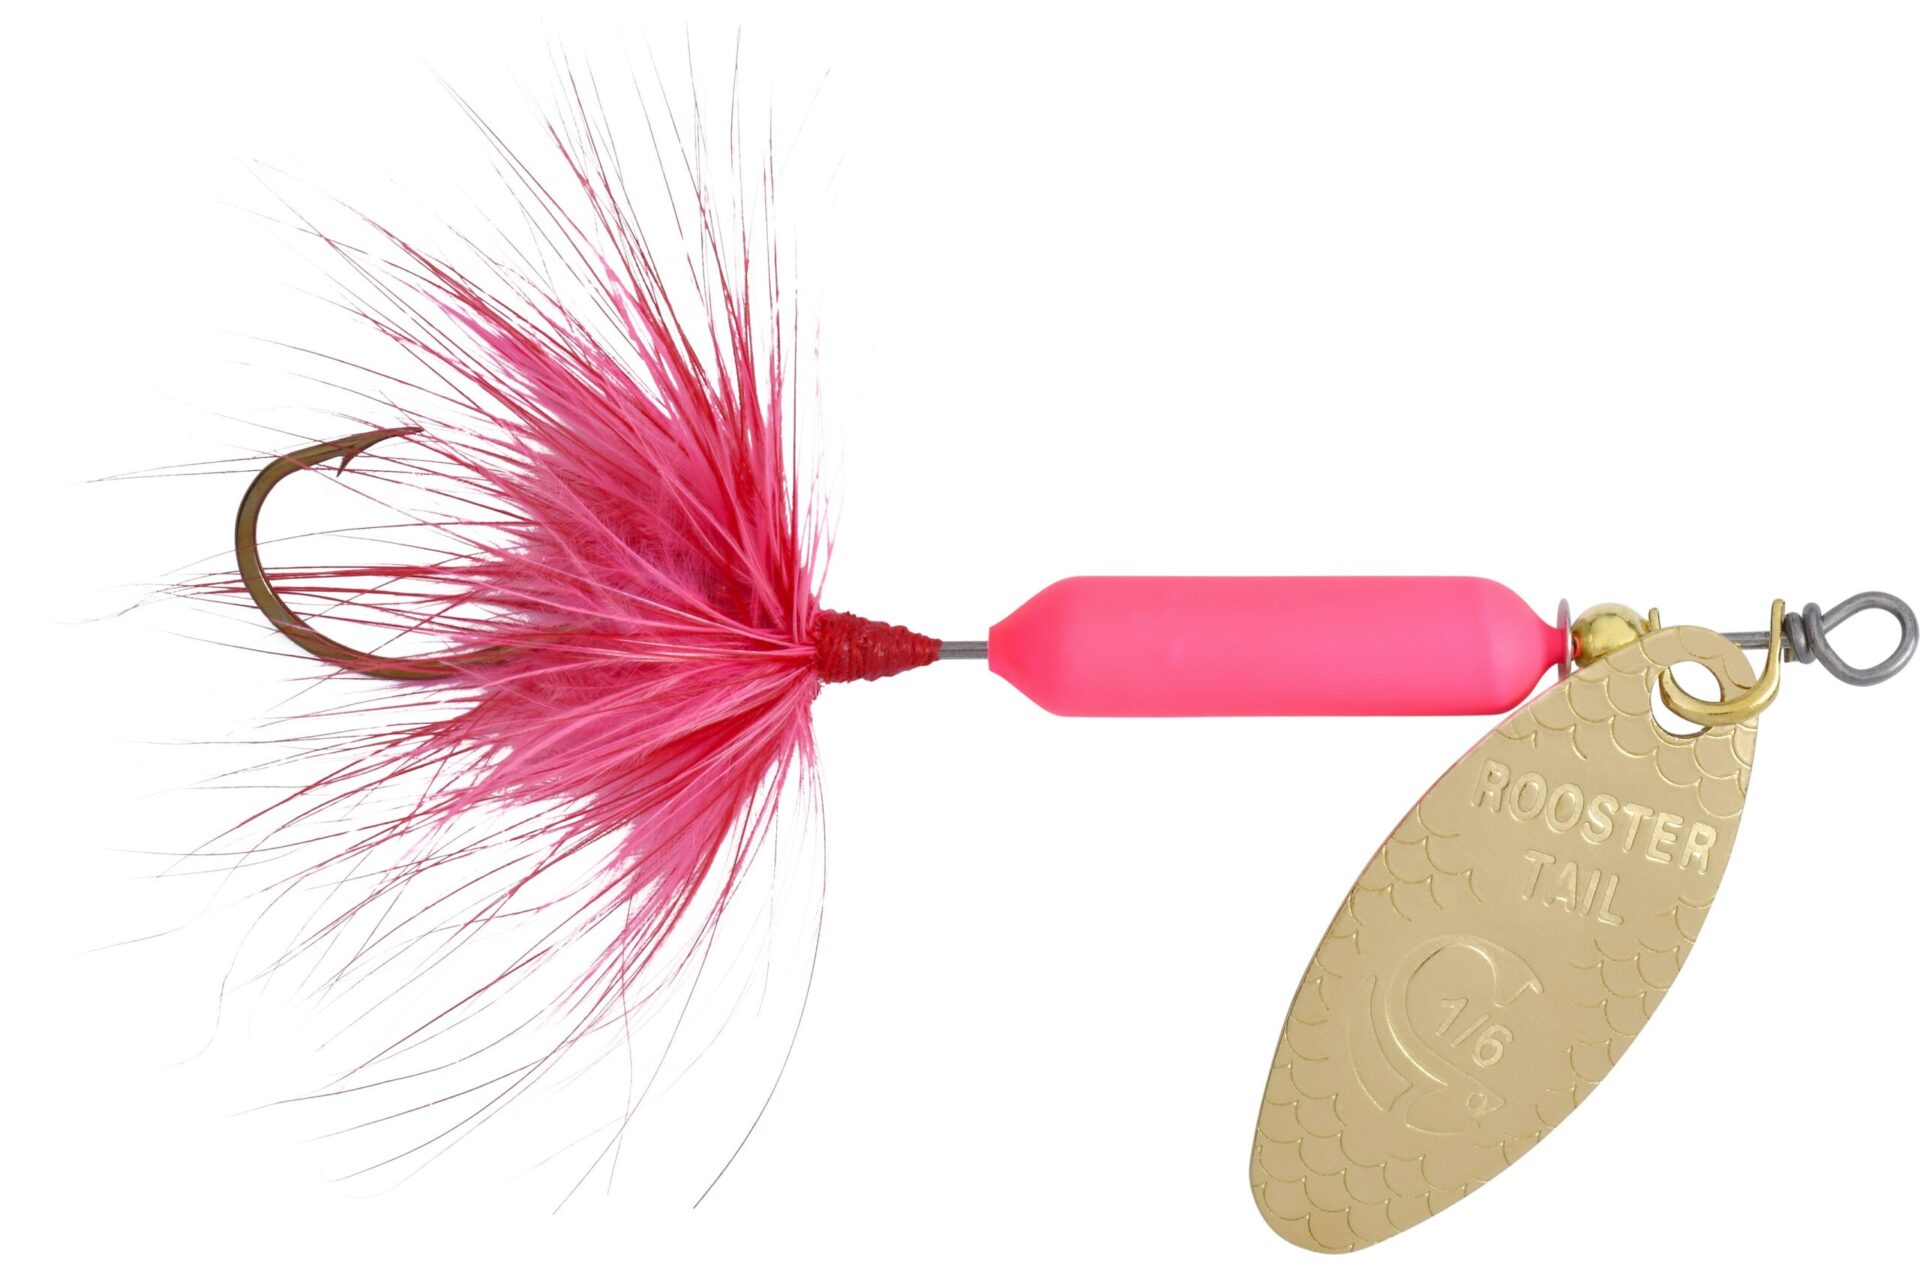 Isca Artificial Rooster Tail YAKIMA BAIT 1/6 OZ - Cor Red - Single